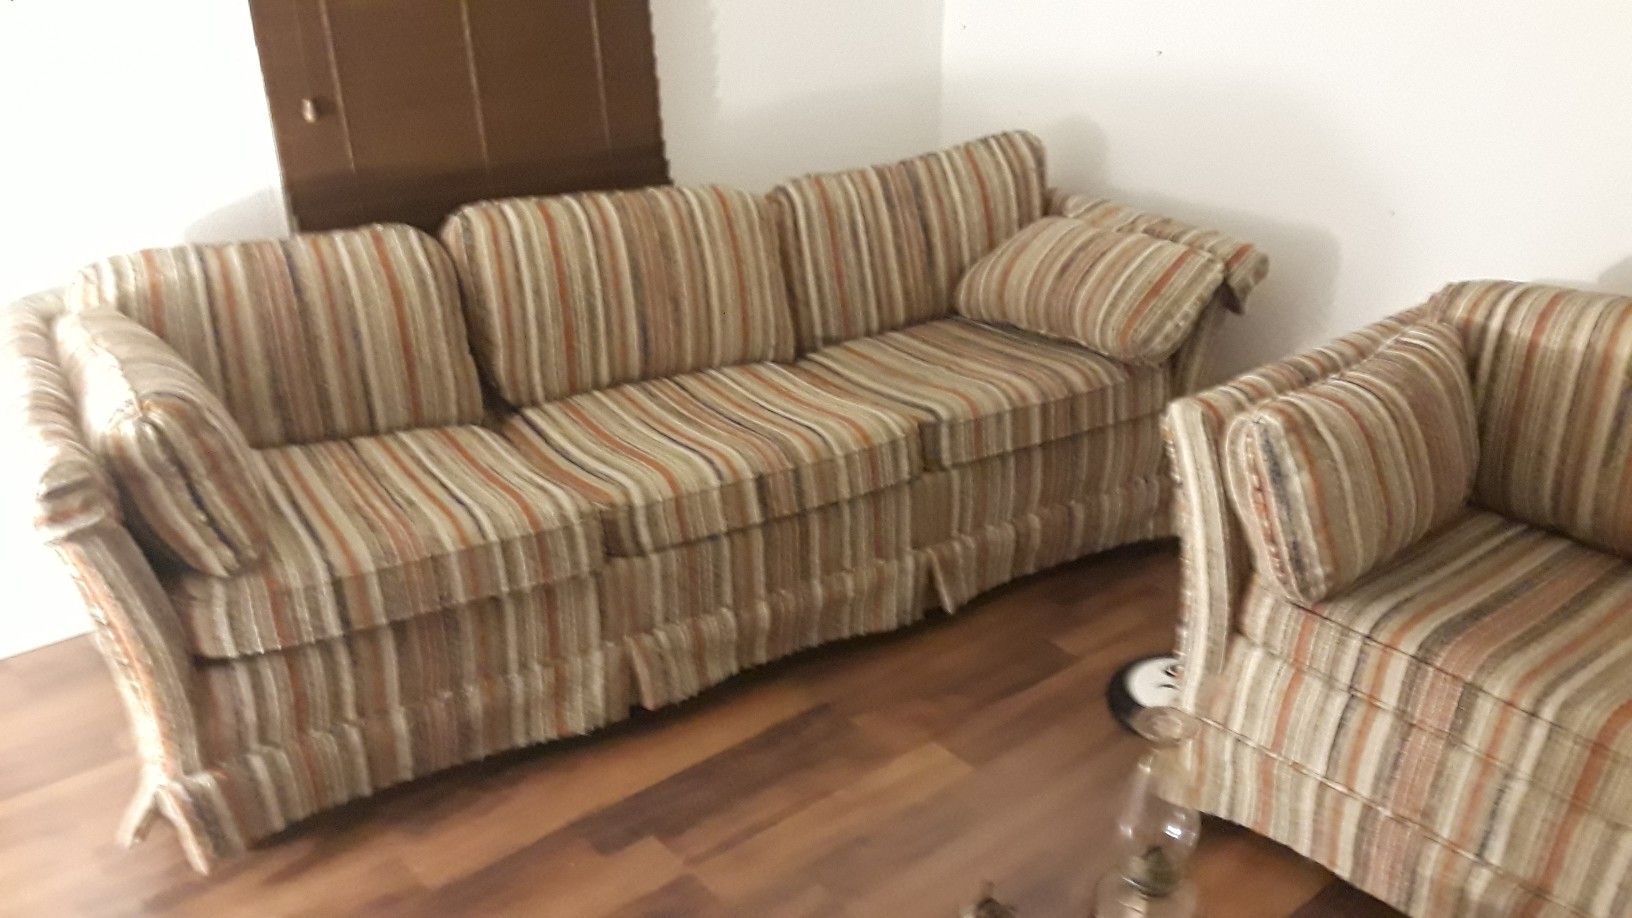 Flex Steel couch and love seat set older in good condition